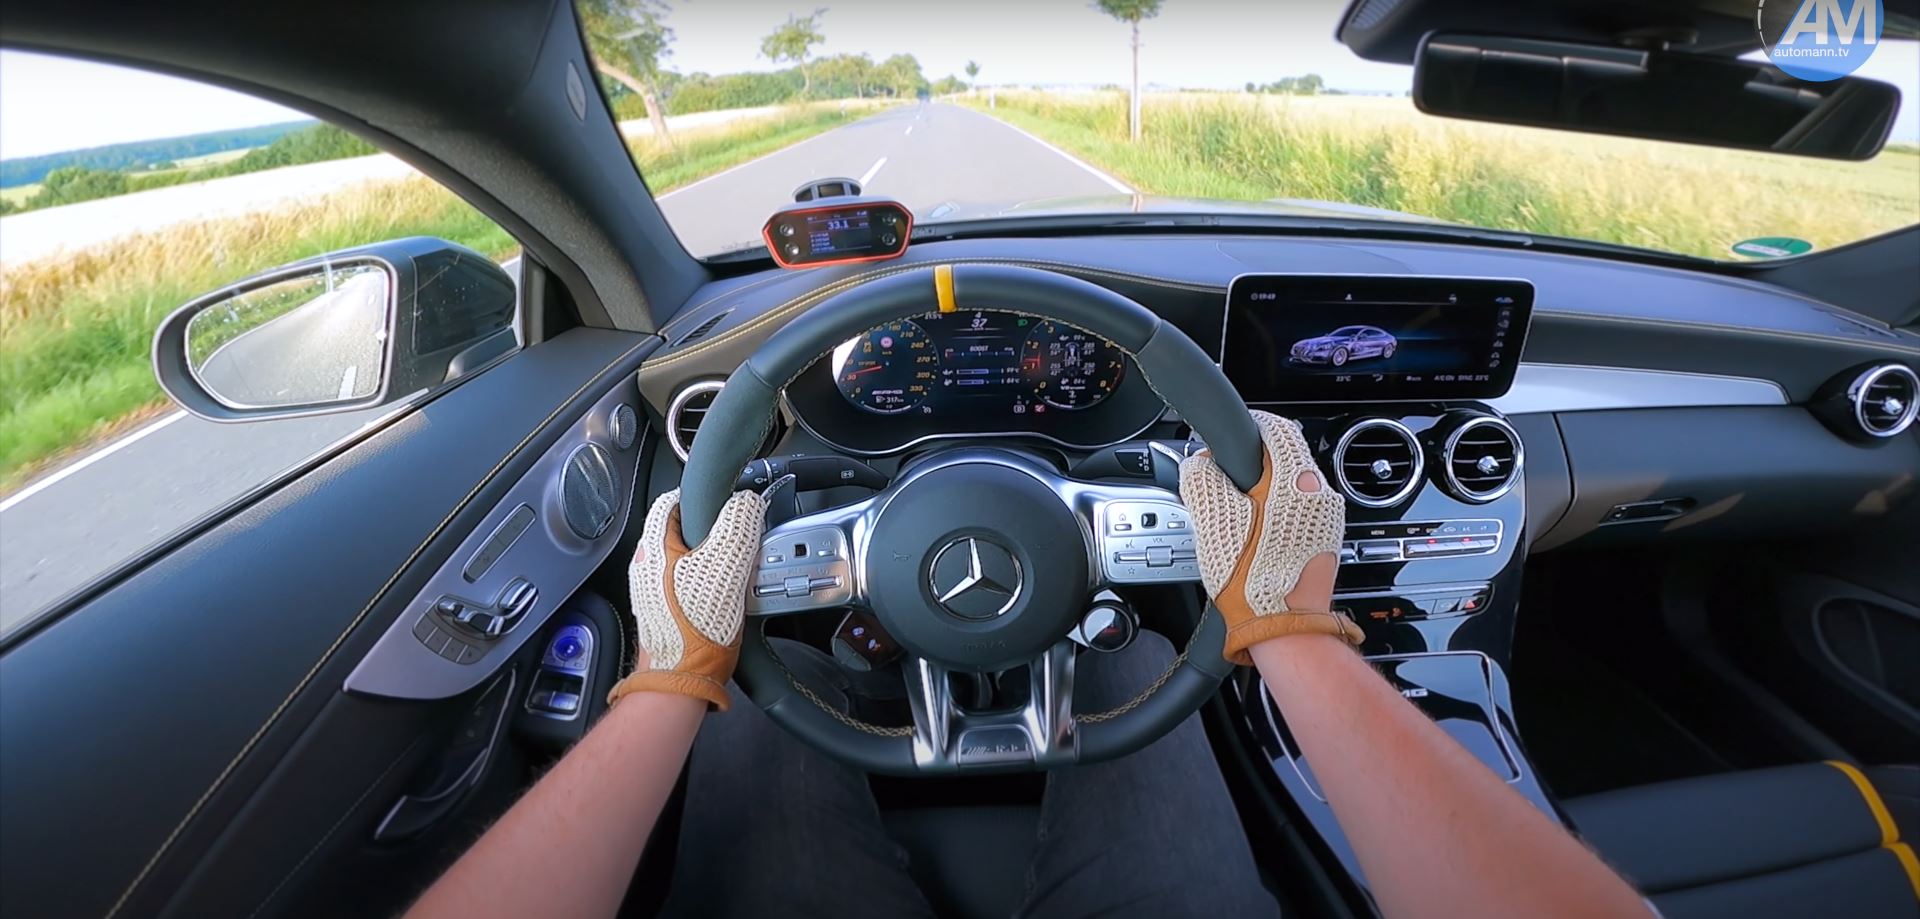 New Mercedes-AMG C63 S Coupe Does an Autobahn Top Speed Run, Doesn't 200 MPH autoevolution